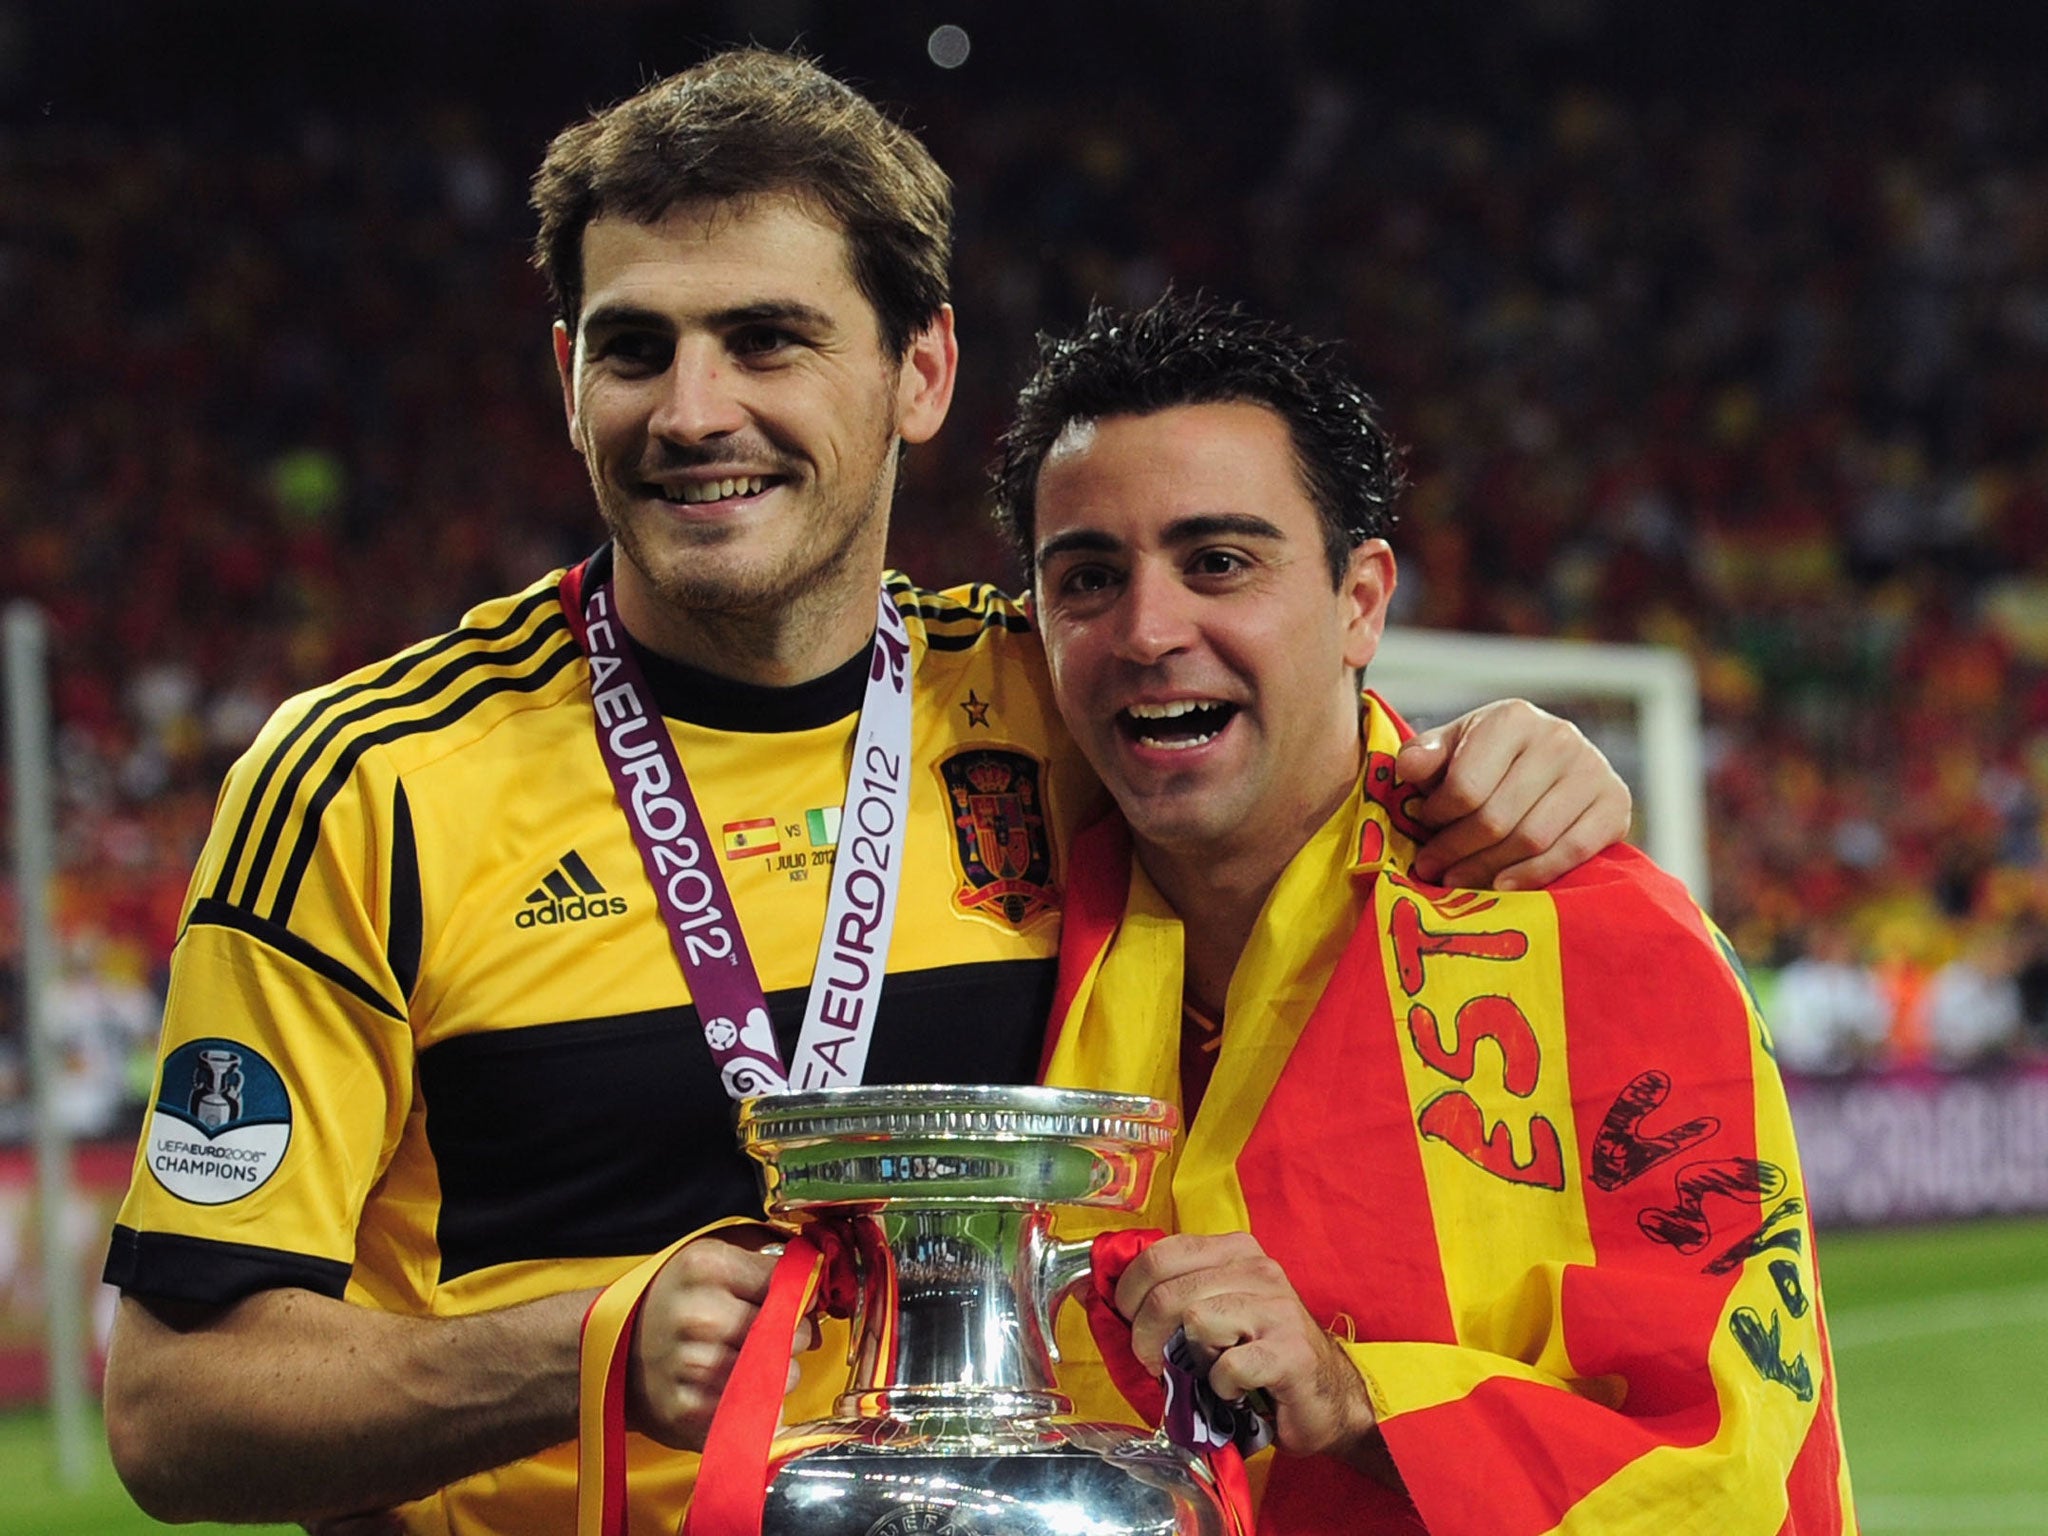 Xavi and Iker Casillas formed a bond playing together at the Under-20 World Cup in Nigeria